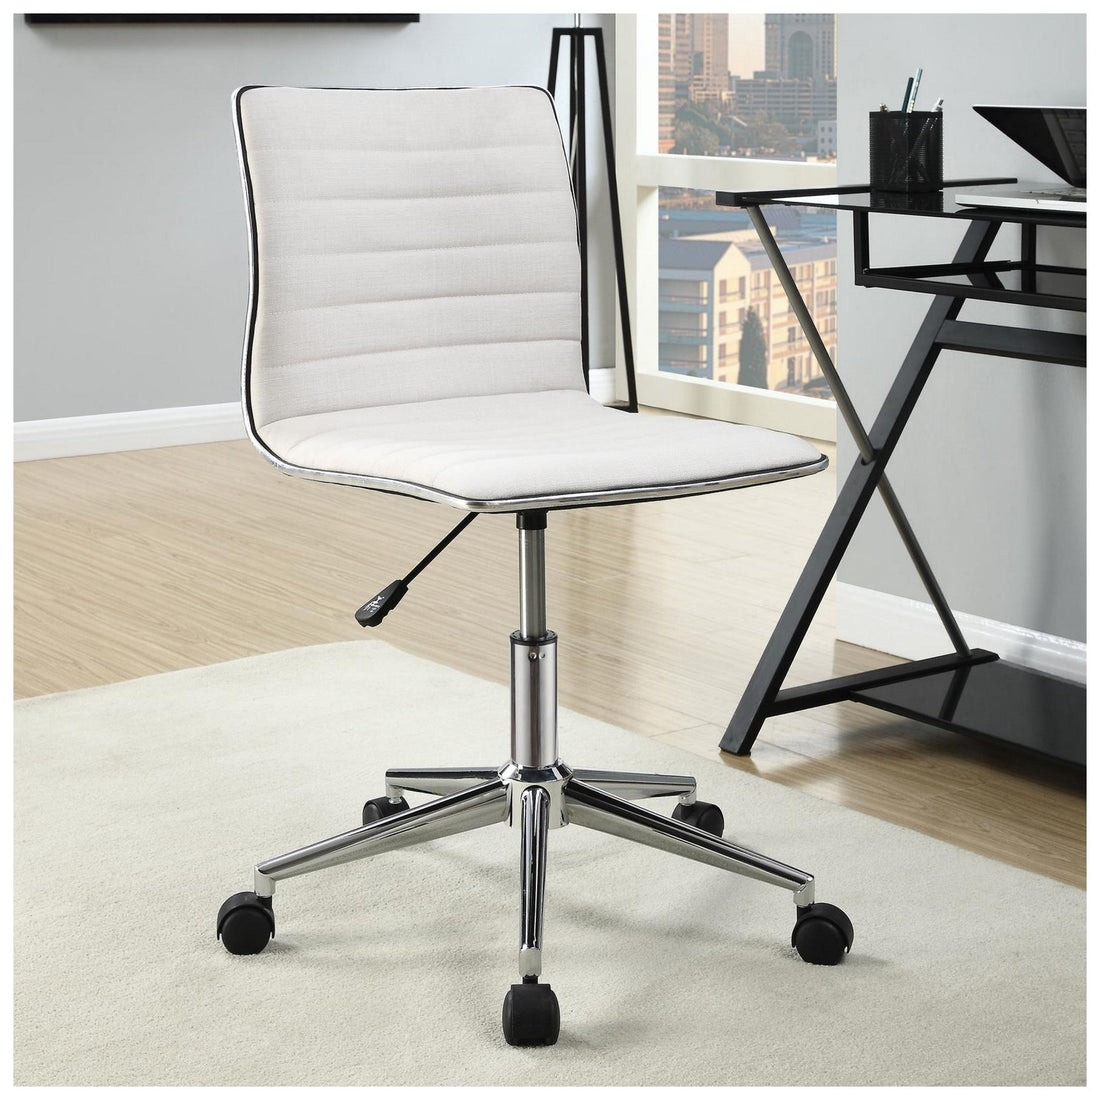 Adjustable Height Office Chair White and Chrome 800726